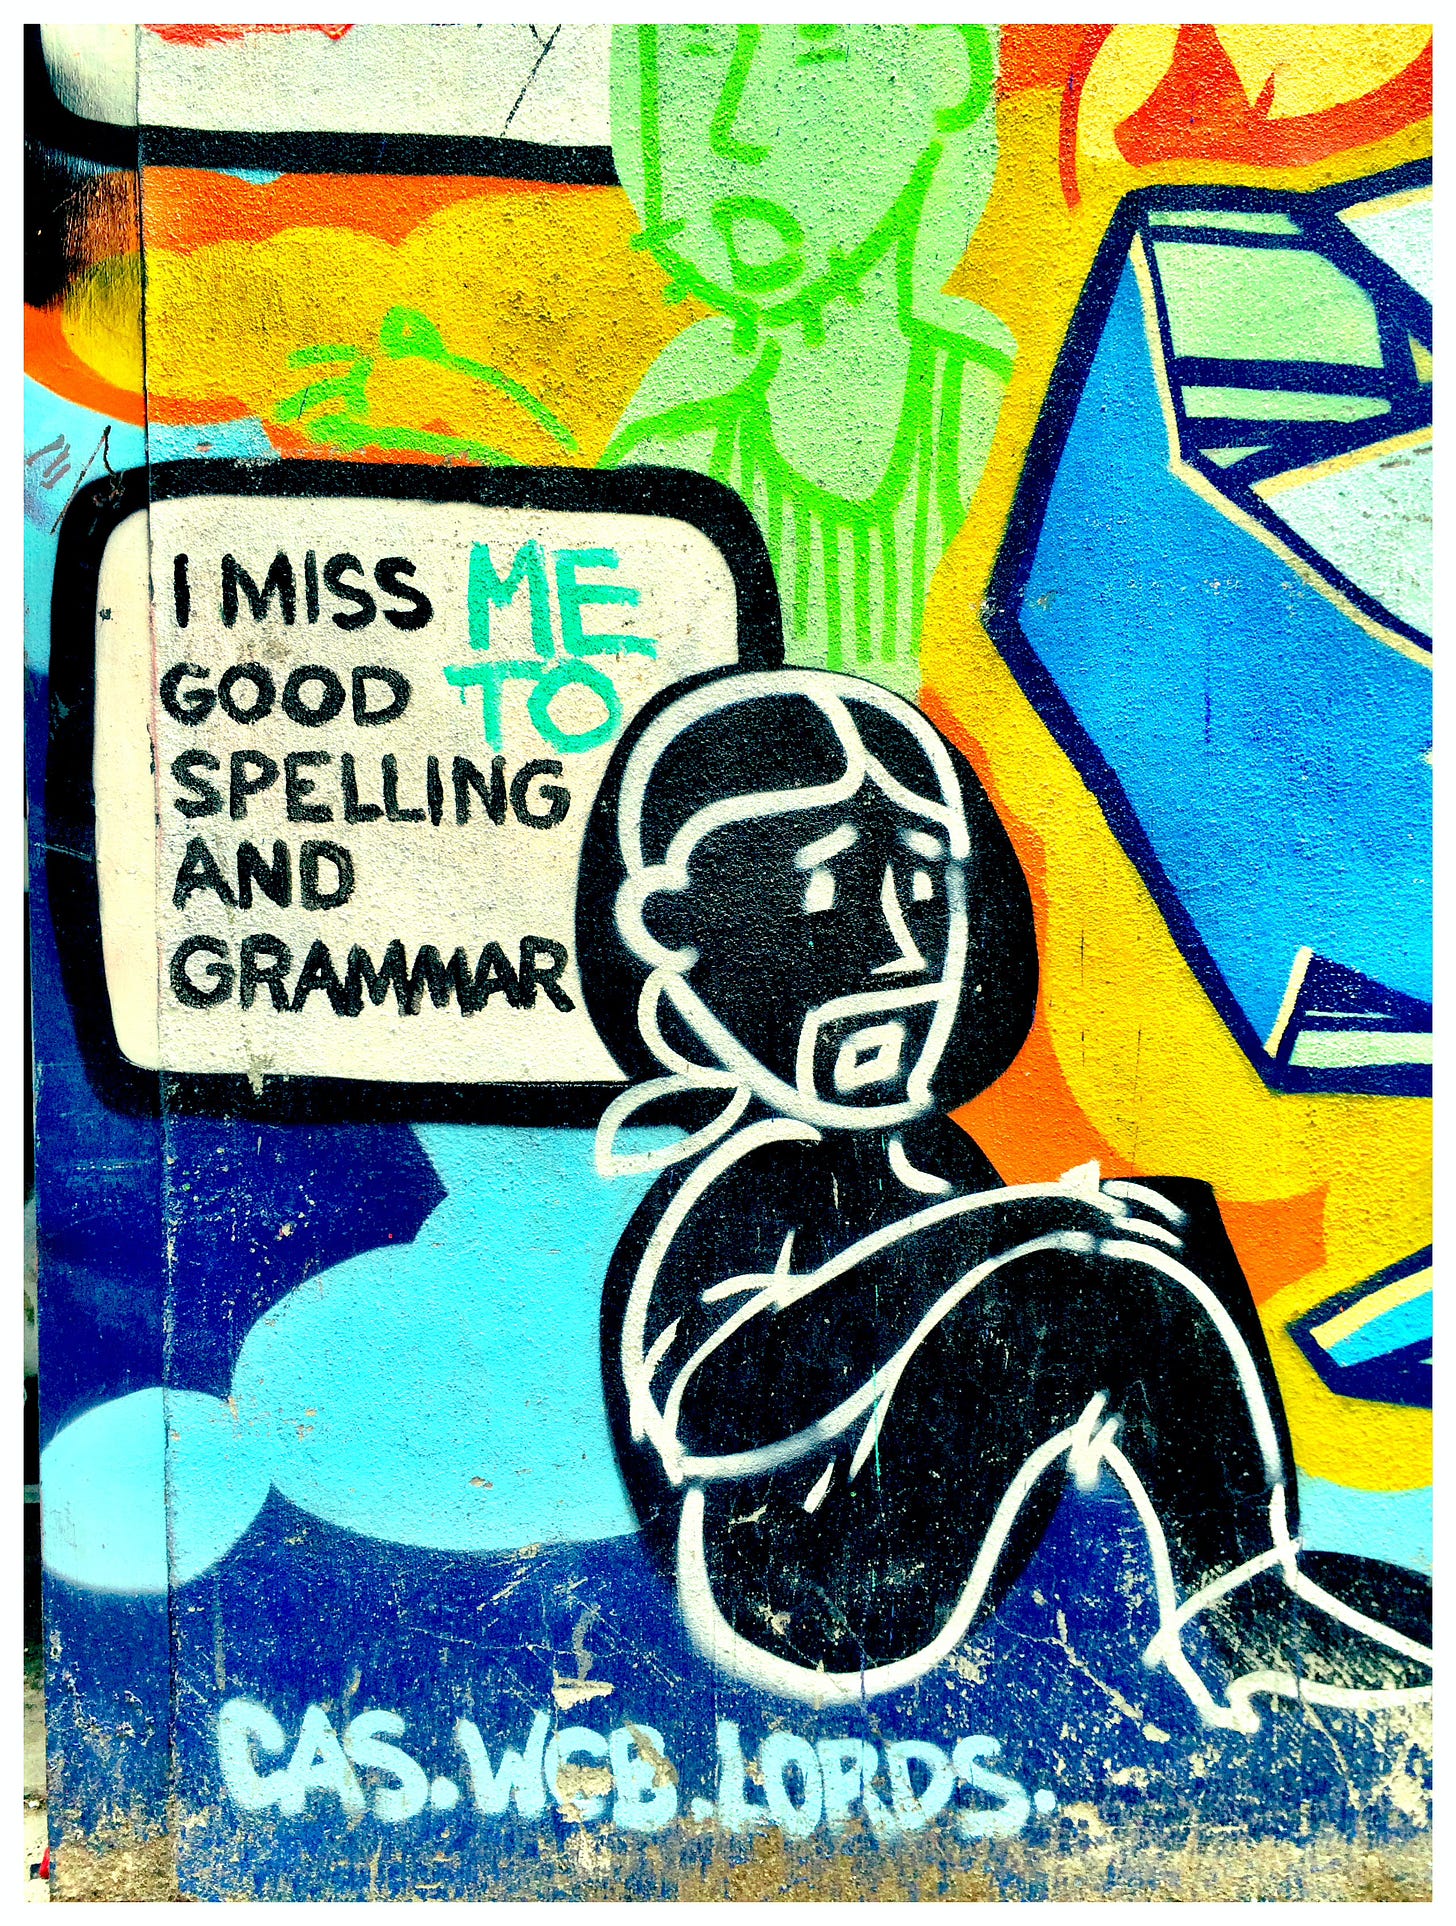 A colorful graffiti image of a figure with a bubble near its head reading "I MISS GOOD SPEELING AND GRAMMAR," and in green paint, the word "ME TO" has been written in the bubble.